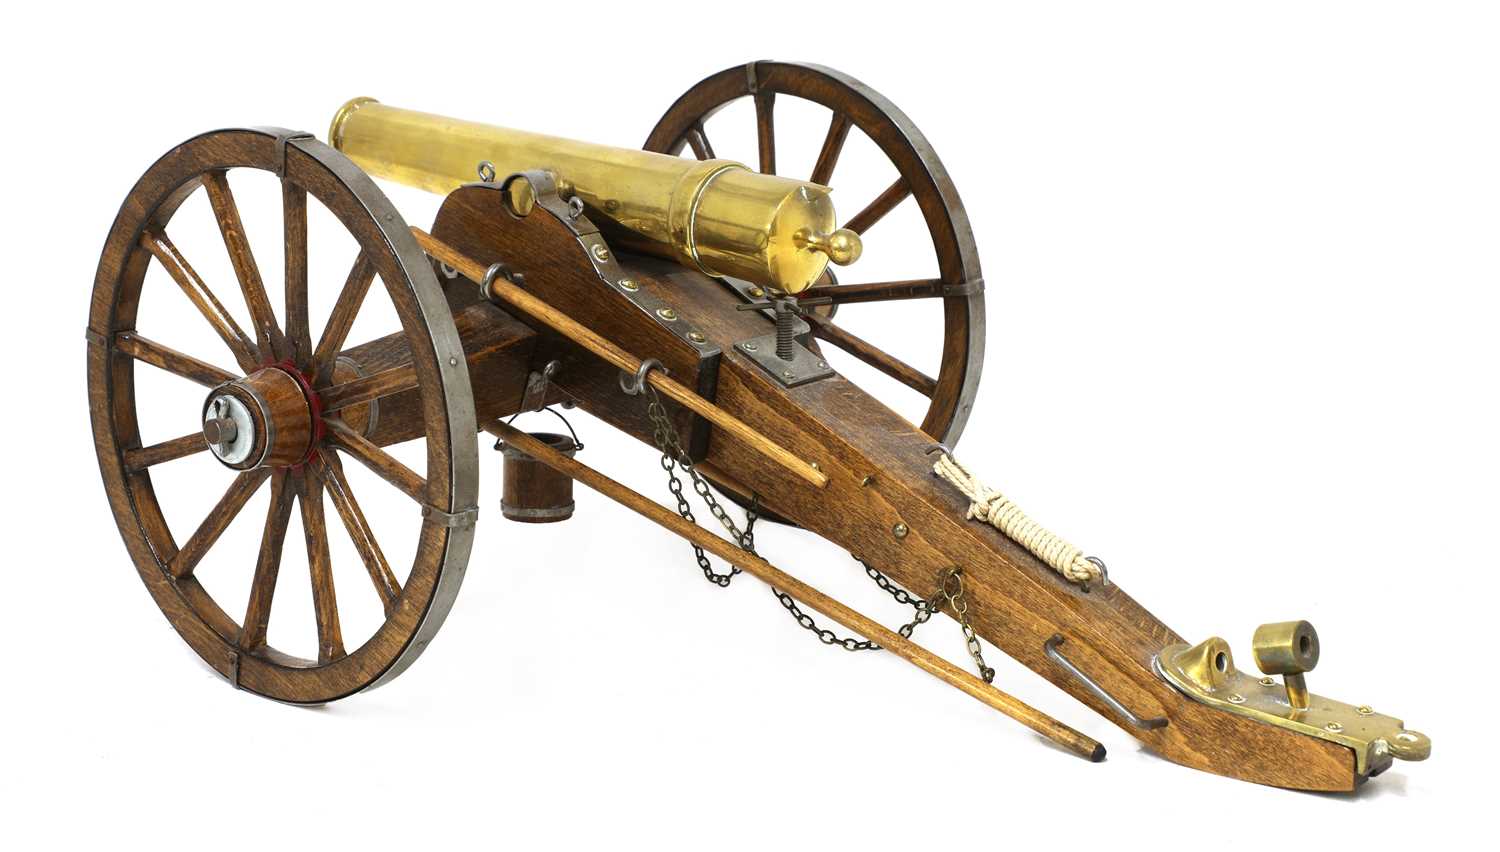 A model of an American Civil War field cannon, - Image 6 of 6